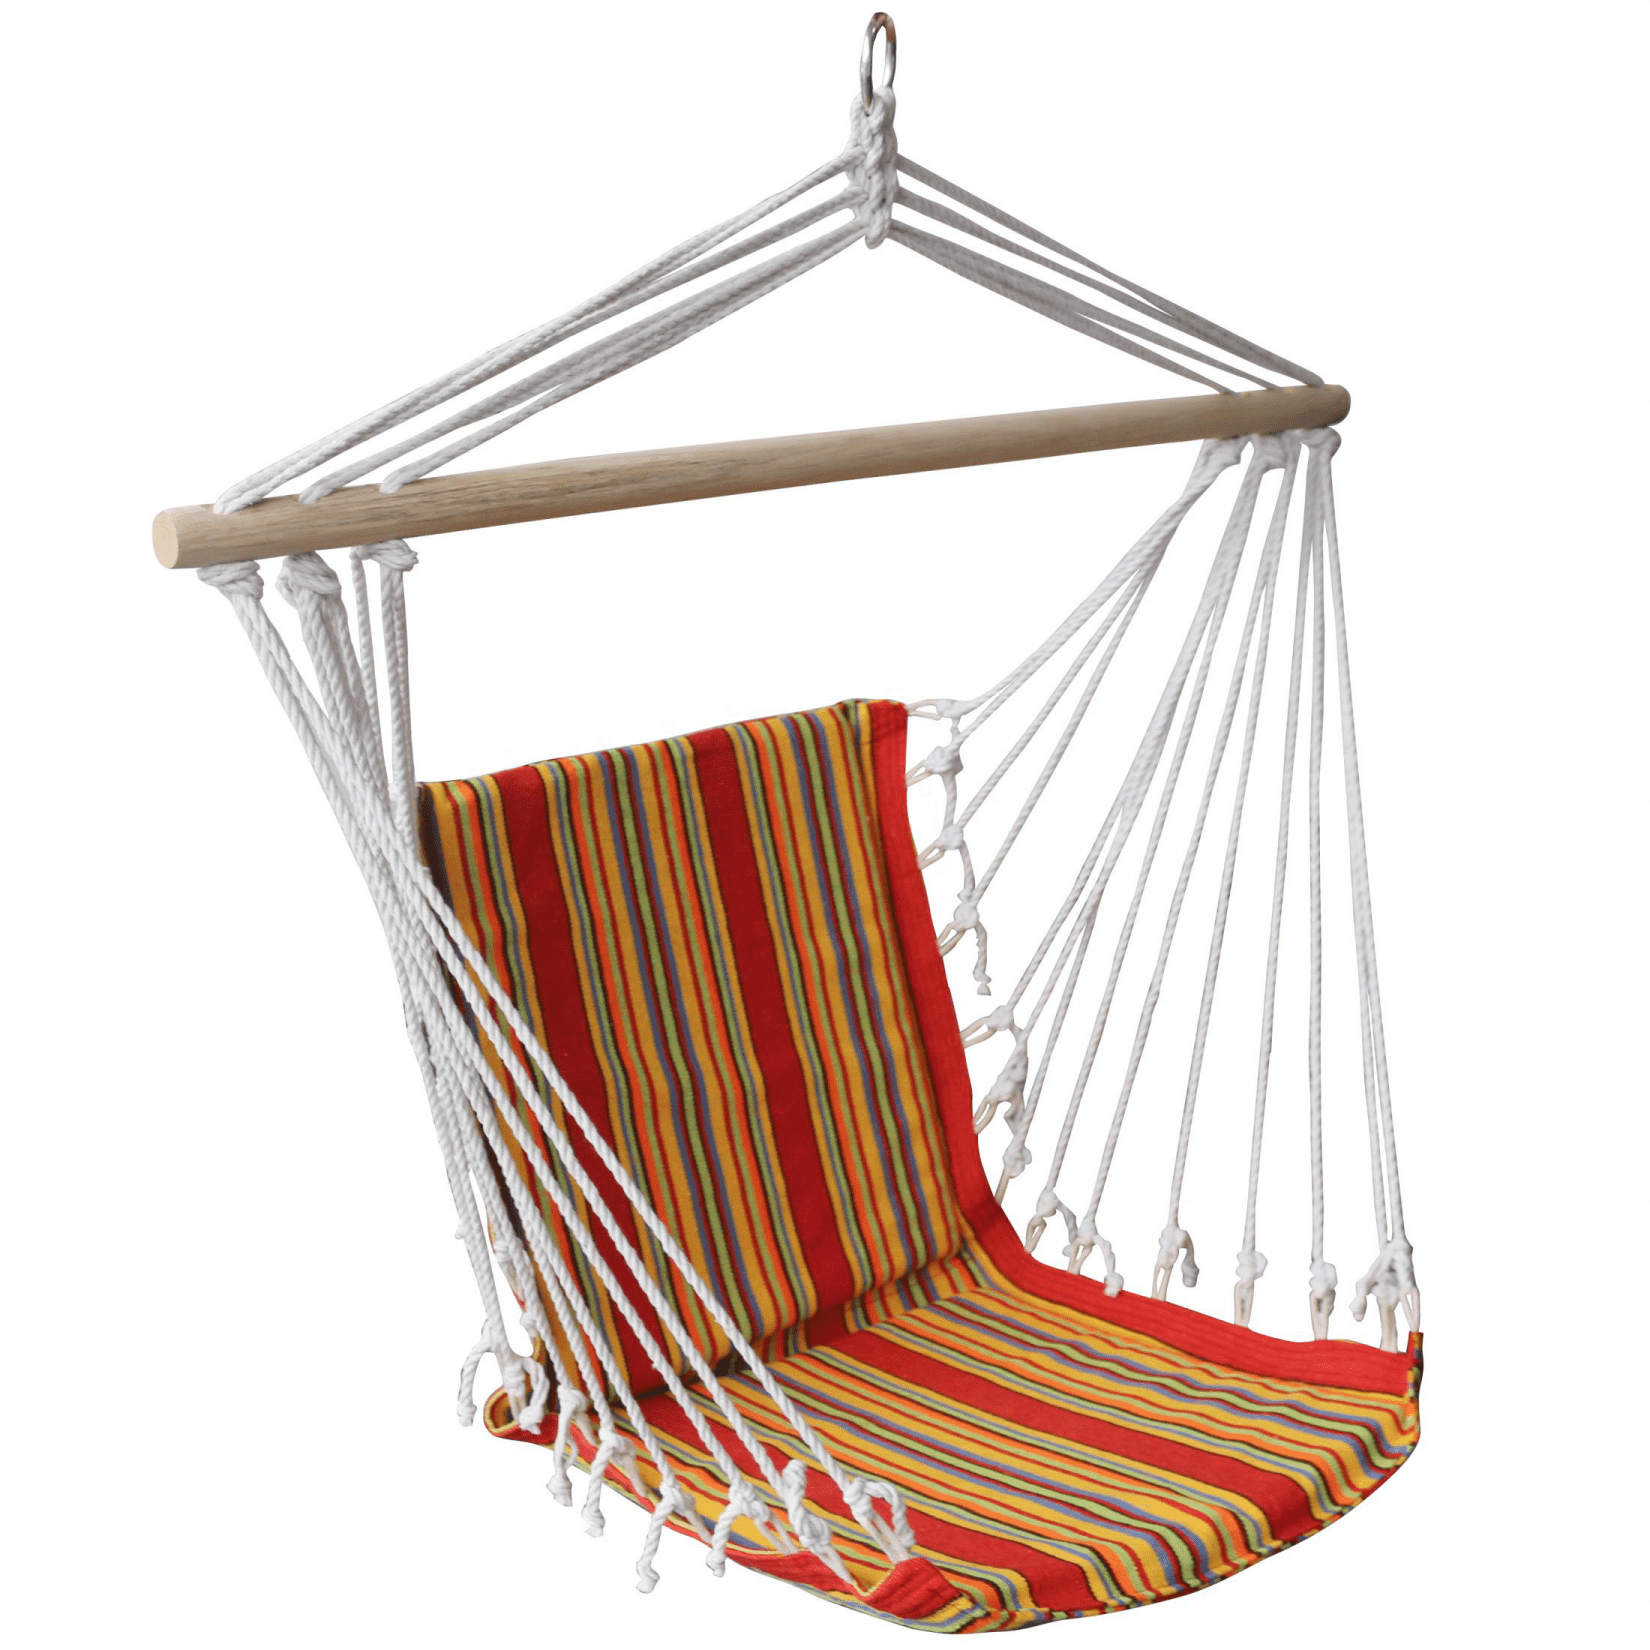 OEM/ODM China Fabric Hanging Chair - Pol.ycotton hammock chair with woodbar – Top Asian